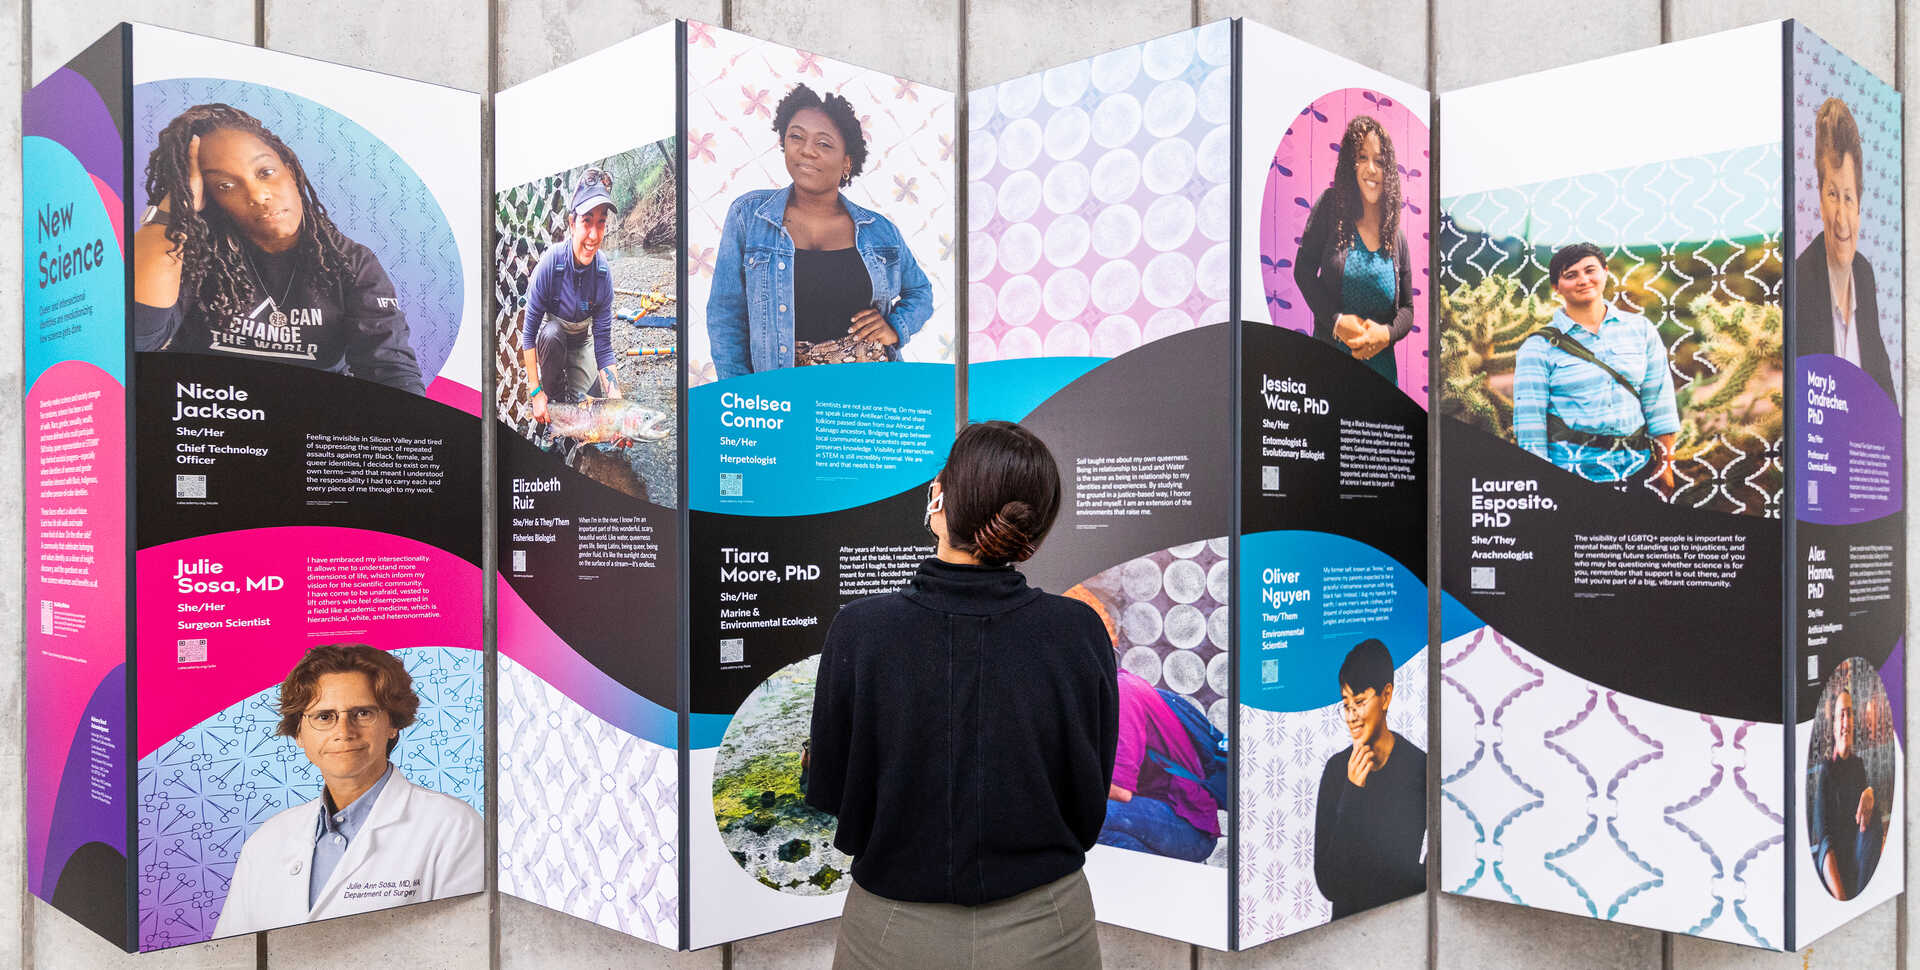 Guest looks at New Science exhibit panel featuring portraits of LGBTQ+ scientists